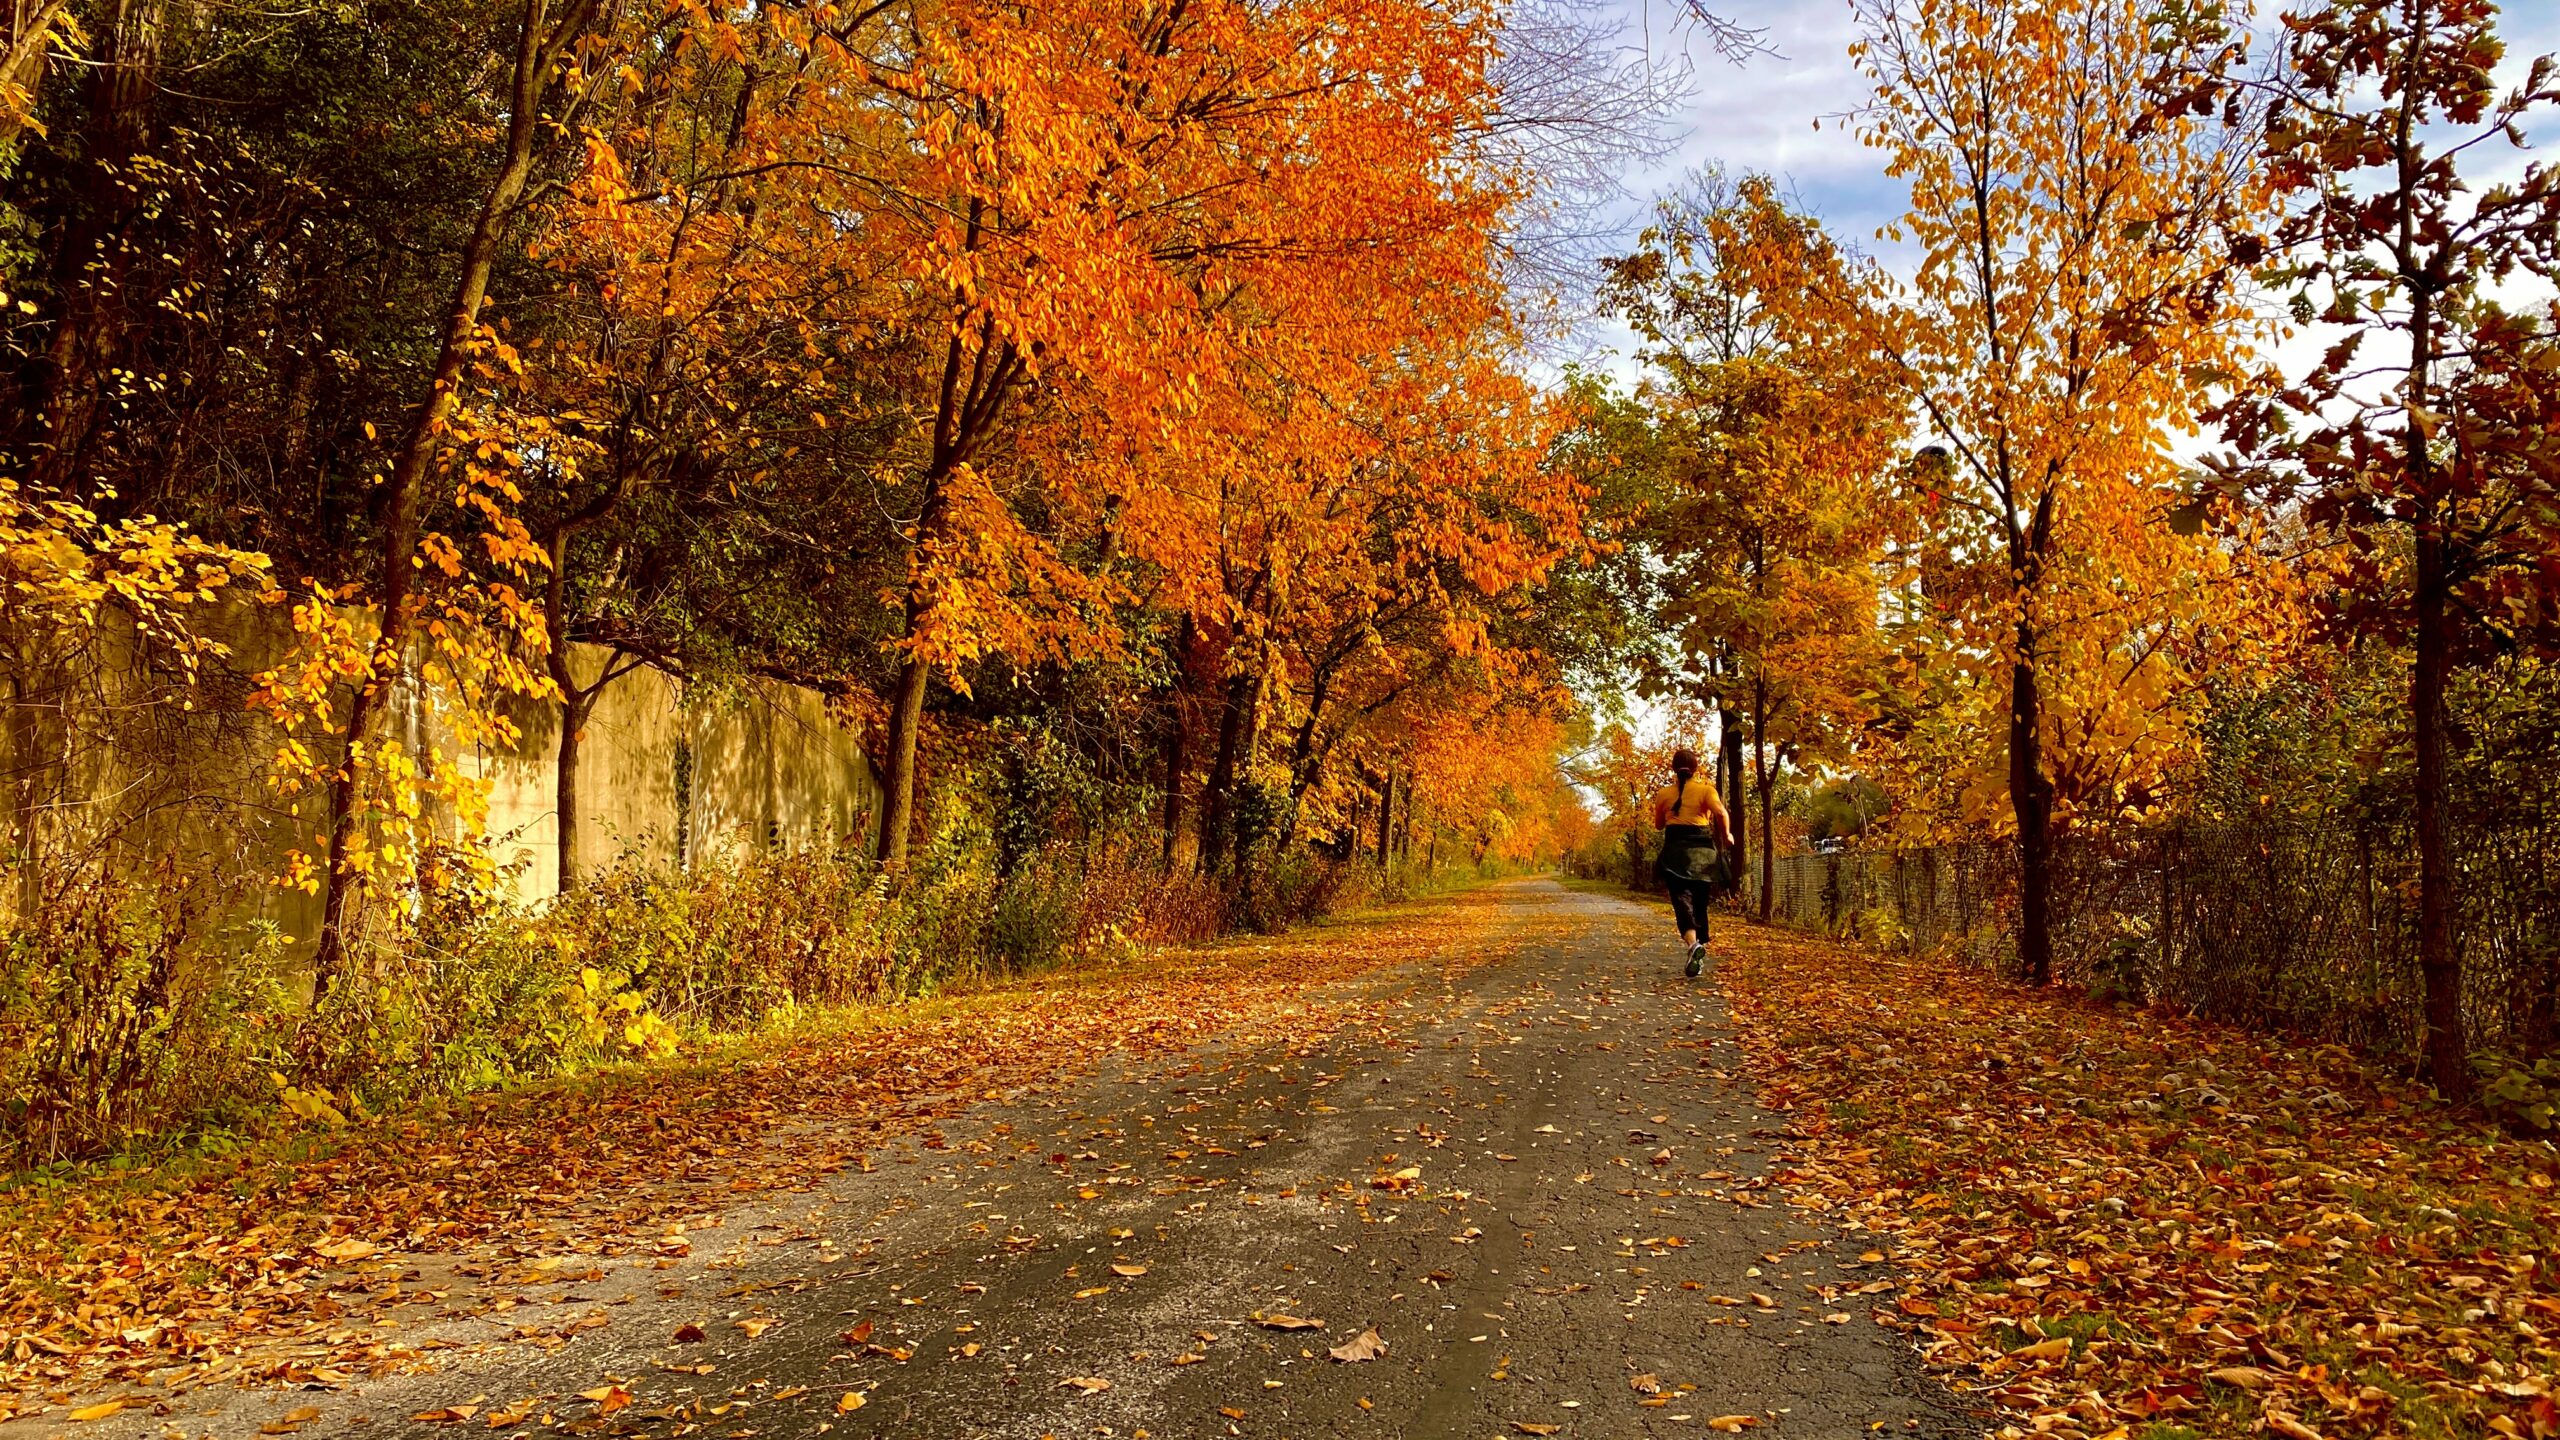 The autumn is a great time to run in the greenbay trail